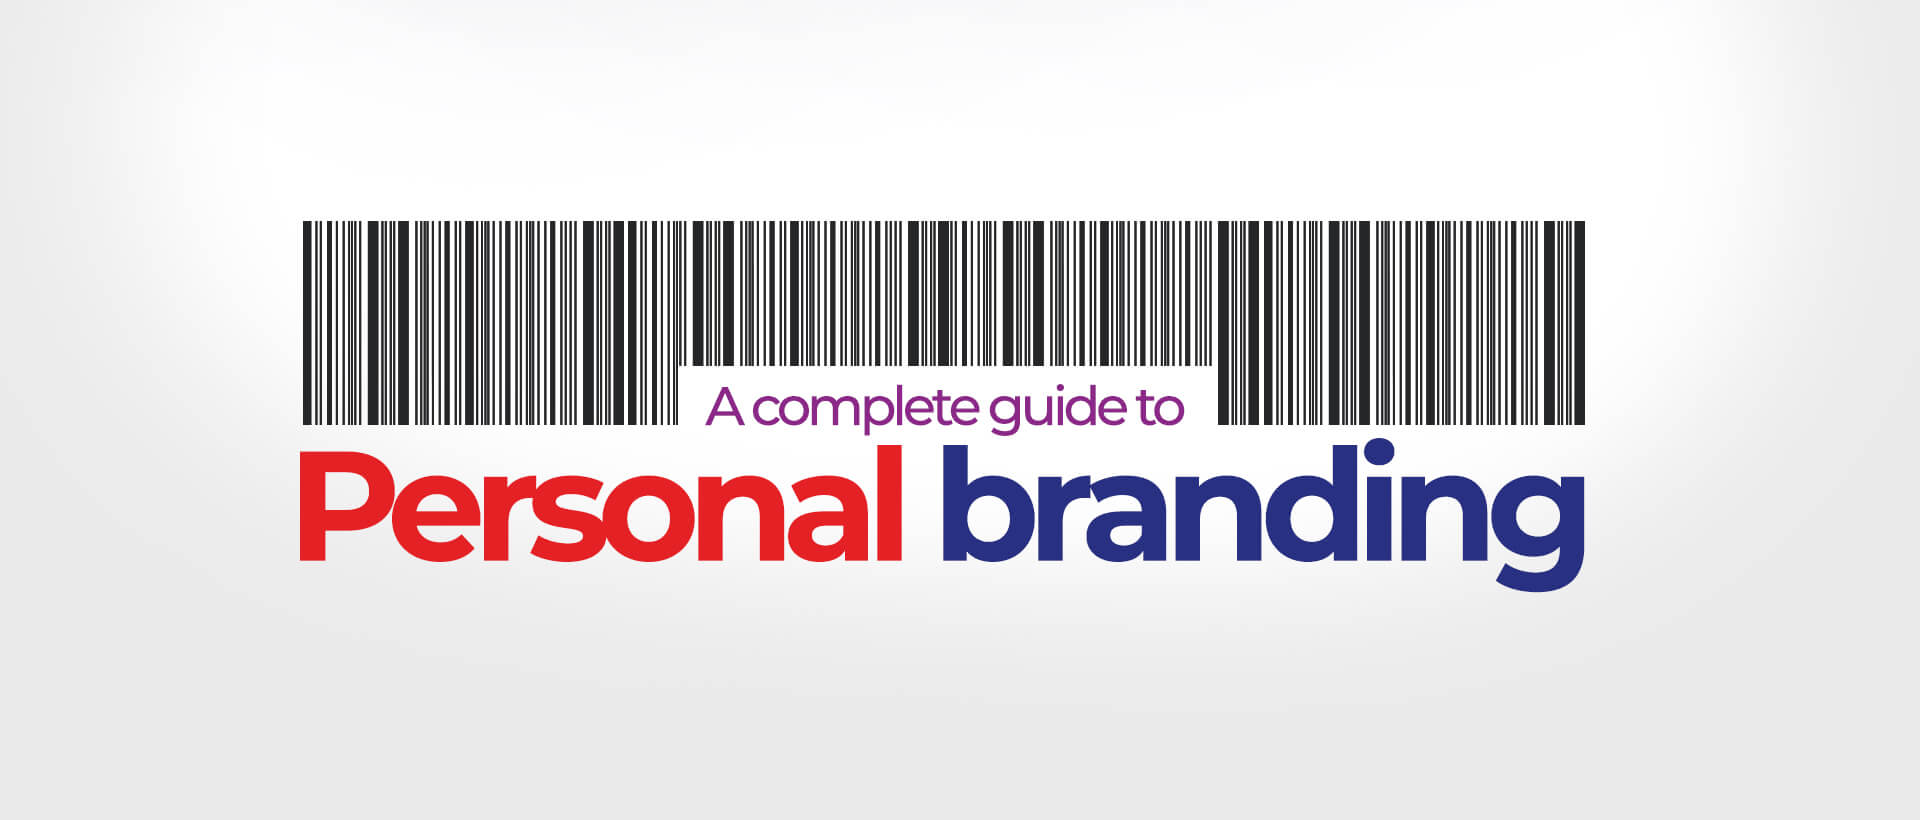 A complete guide to personal branding